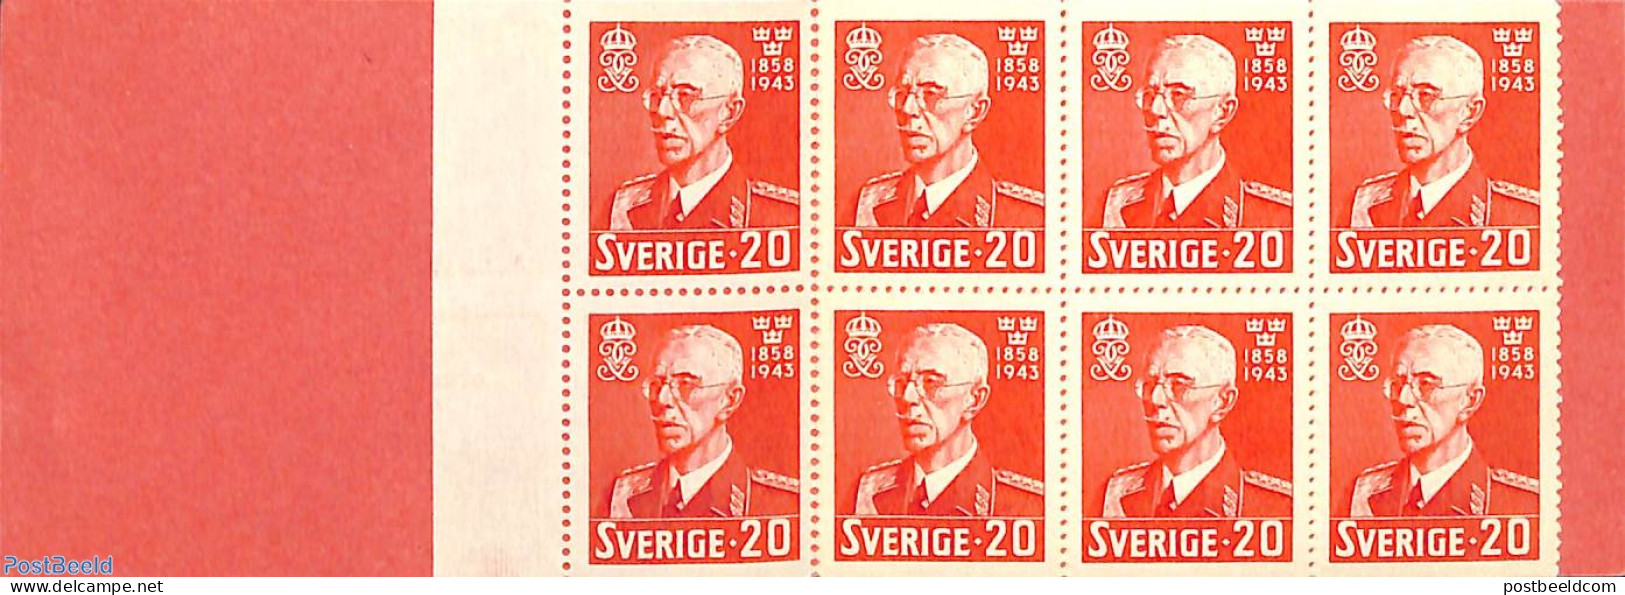 Sweden 1943 King Gustav V 85th Anniversary, Booklet, Mint NH, History - Kings & Queens (Royalty) - Stamp Booklets - Unused Stamps